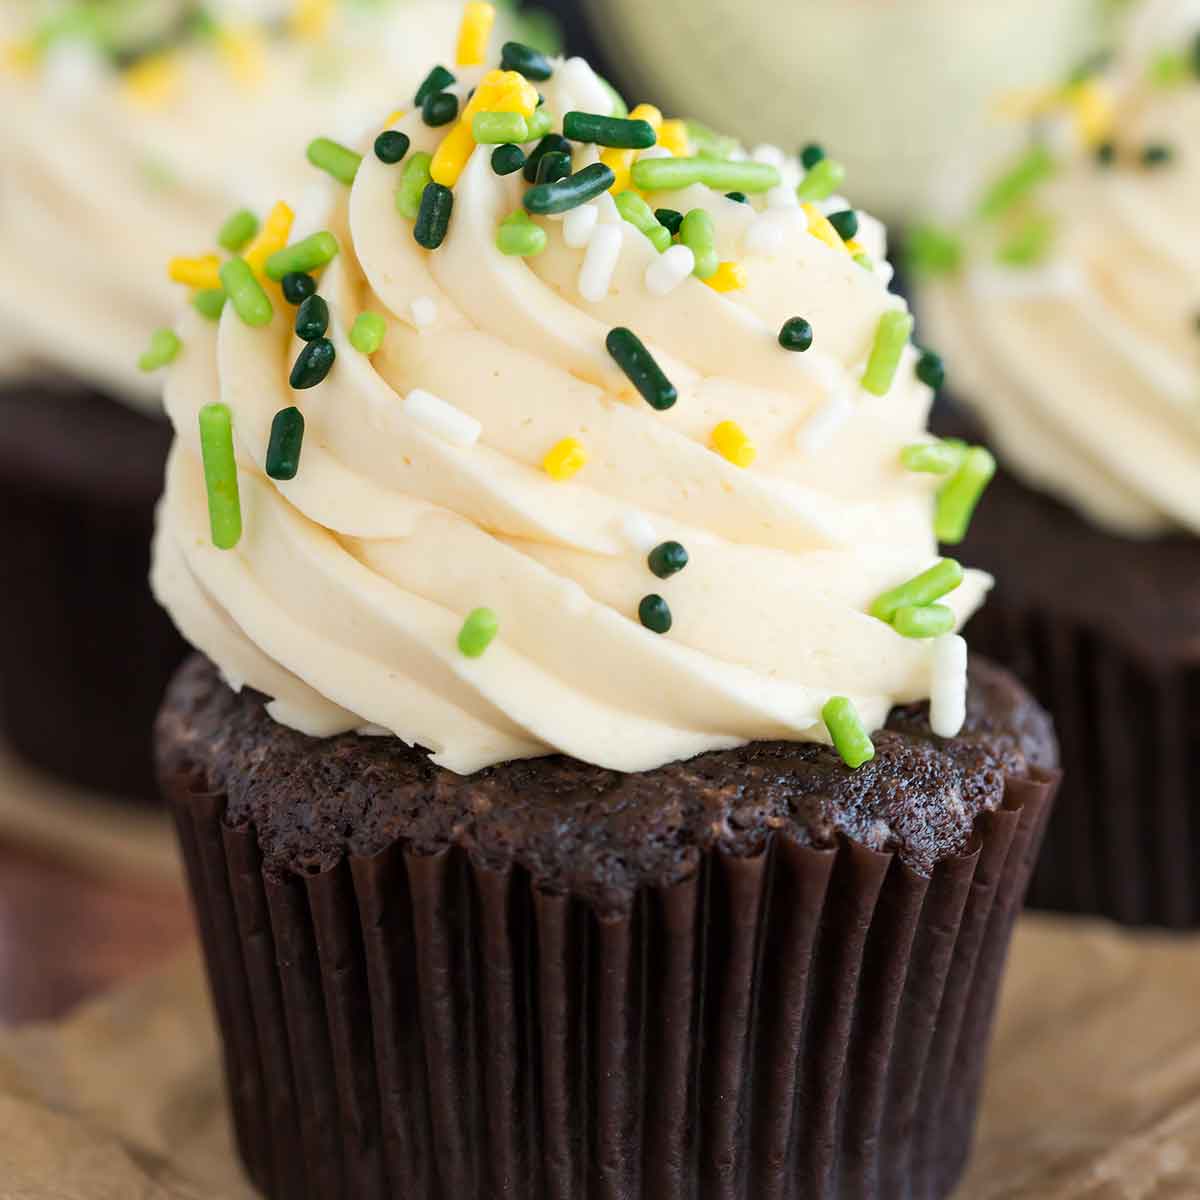 Guinness cupcakes with whiskey ganache filling and Irish cream frosting on brown parchment paper and green sprinkles on top.